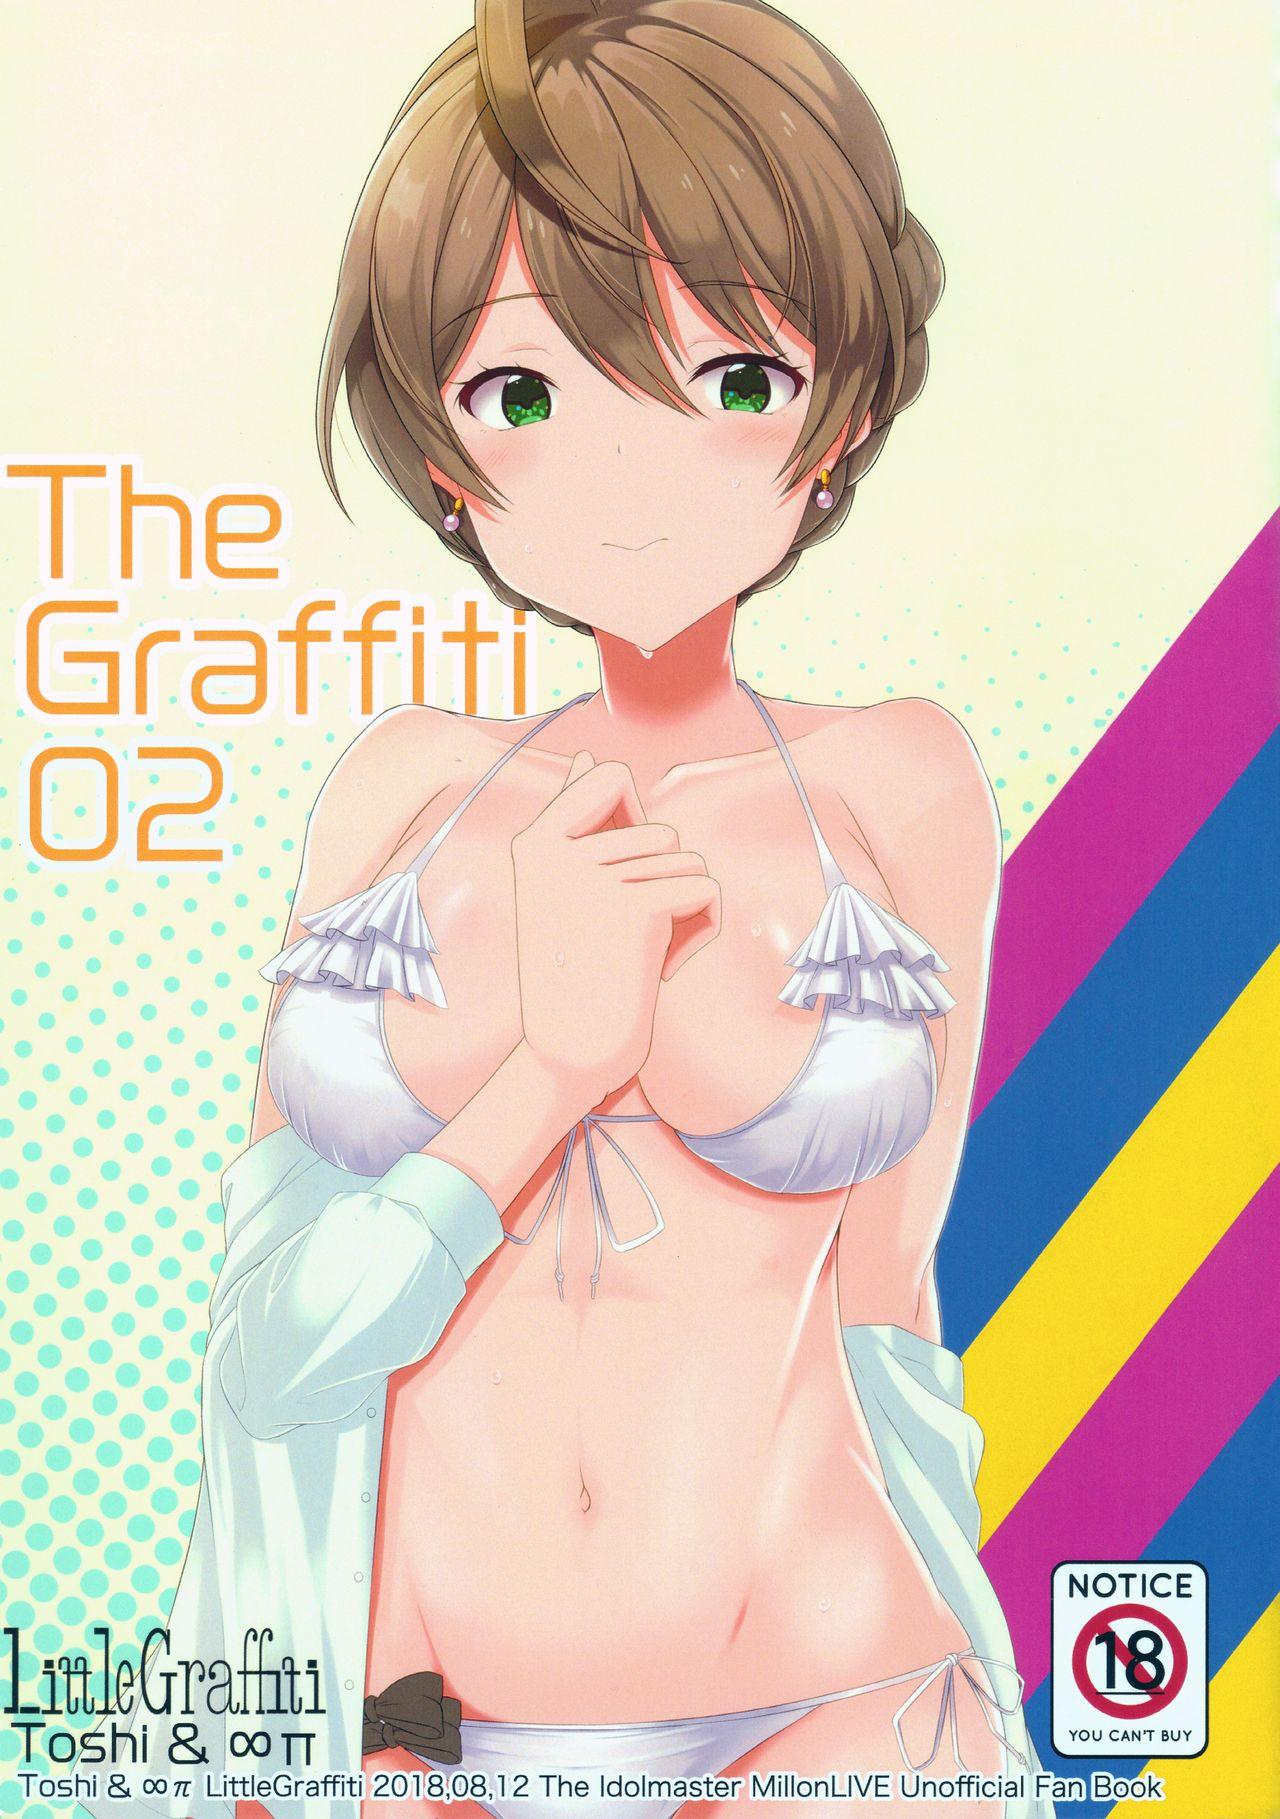 Exhibitionist (C94) [LittleGraffiti (Toshi, ∞π) The Graffiti 02 (THE IDOLM@STER MILLION LIVE!) - The idolmaster Fucking Pussy - Page 1